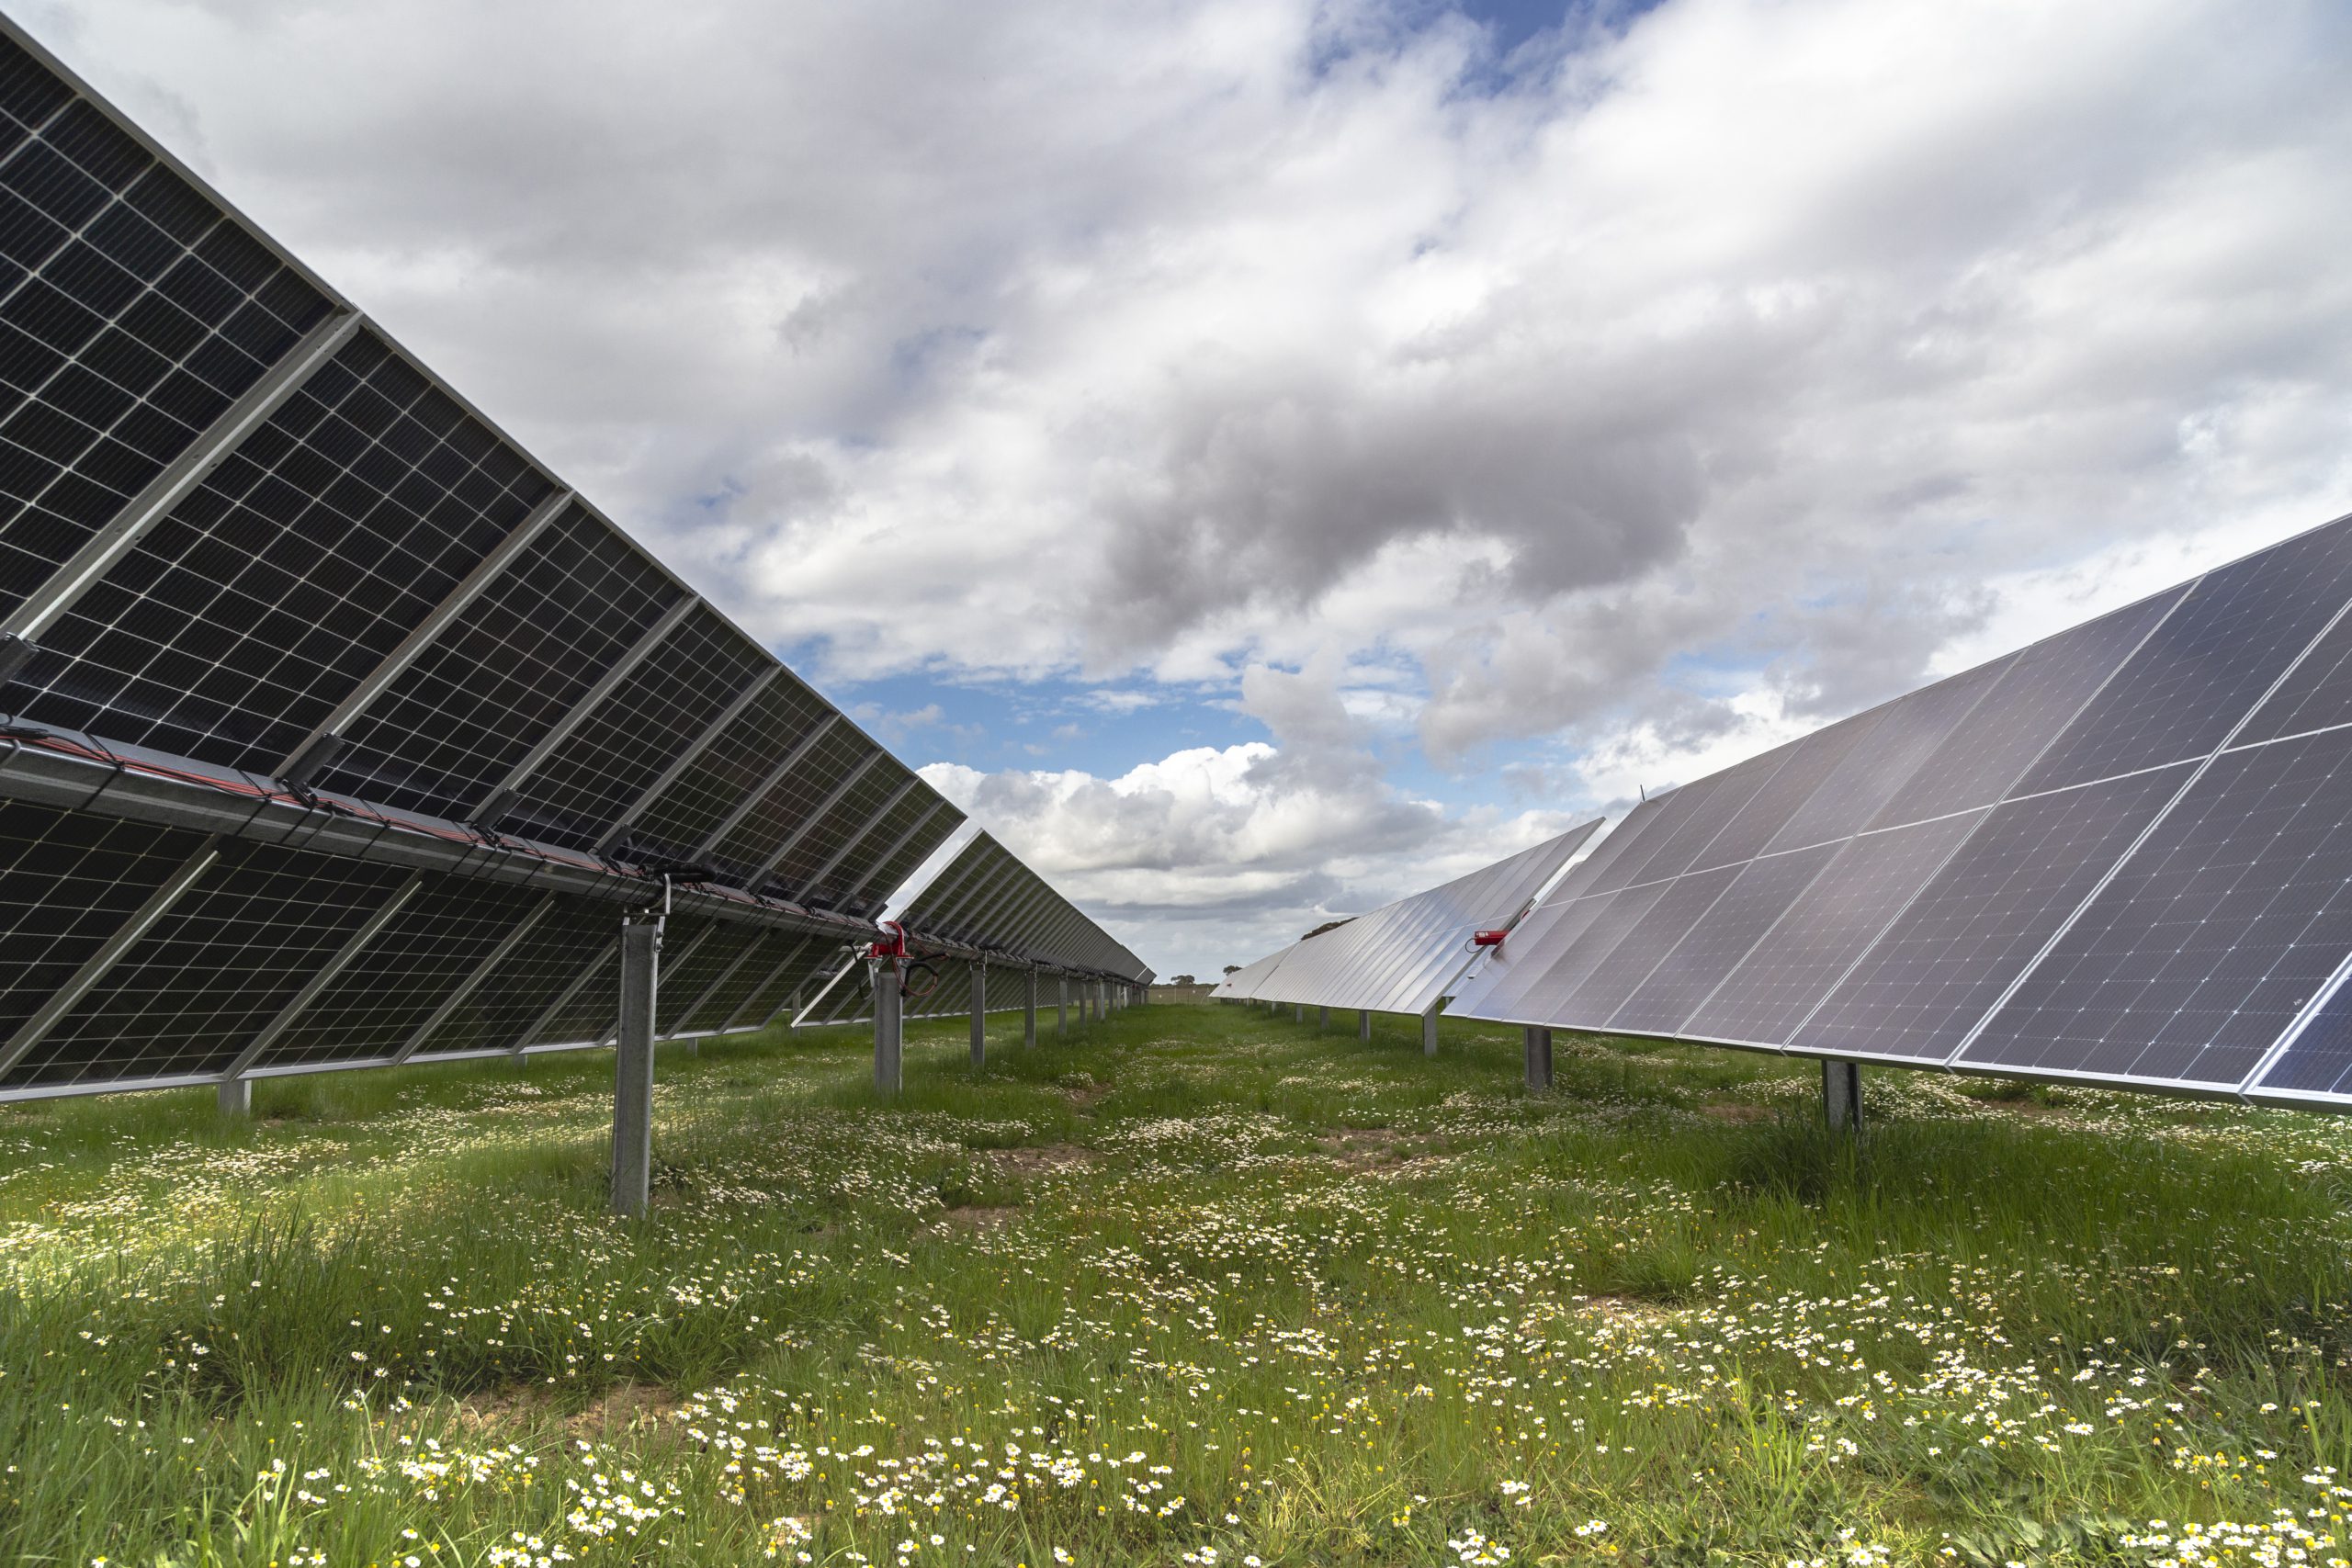 Photovoltaic panels on a Soltec solar tracker over a field with flowers.